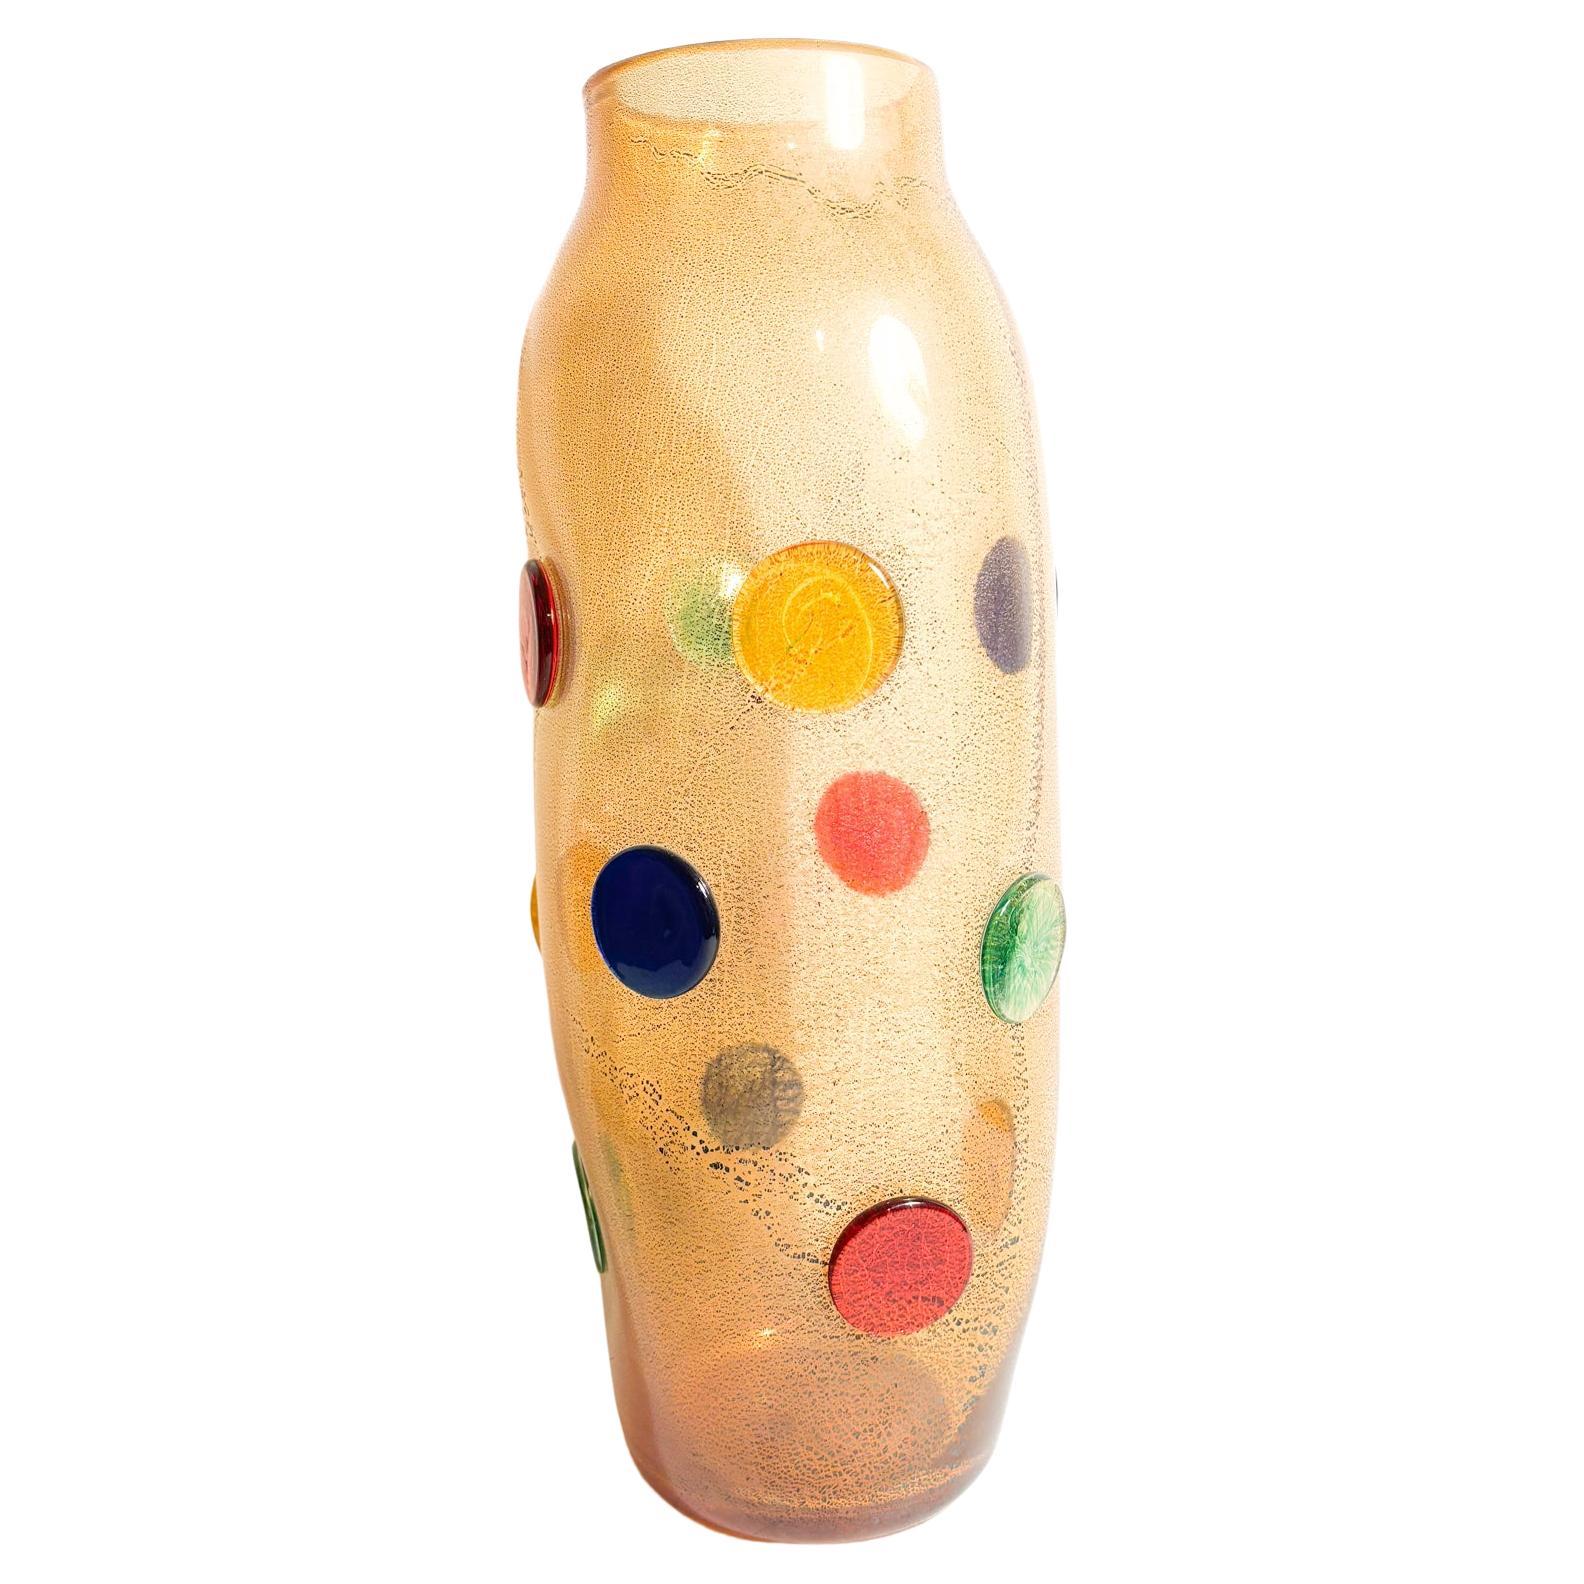 La Murrina Vase in Multicolored Murano Glass with Gold Leaf from the 1980s For Sale